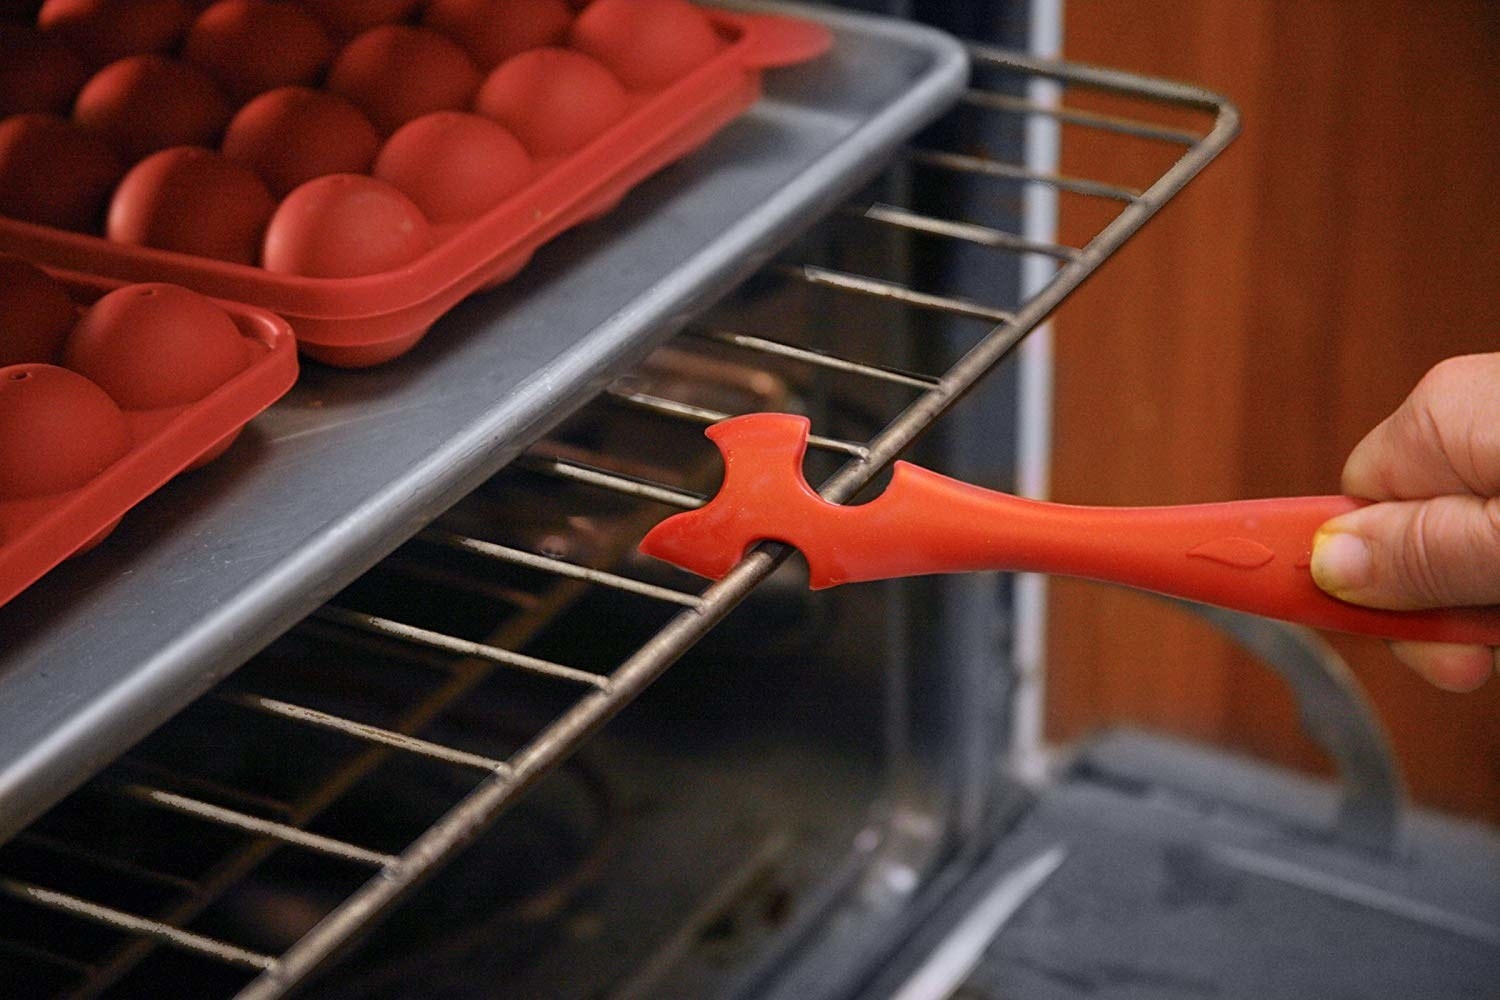 hand using spatula-like tool with notches to grab an oven rack to pull out